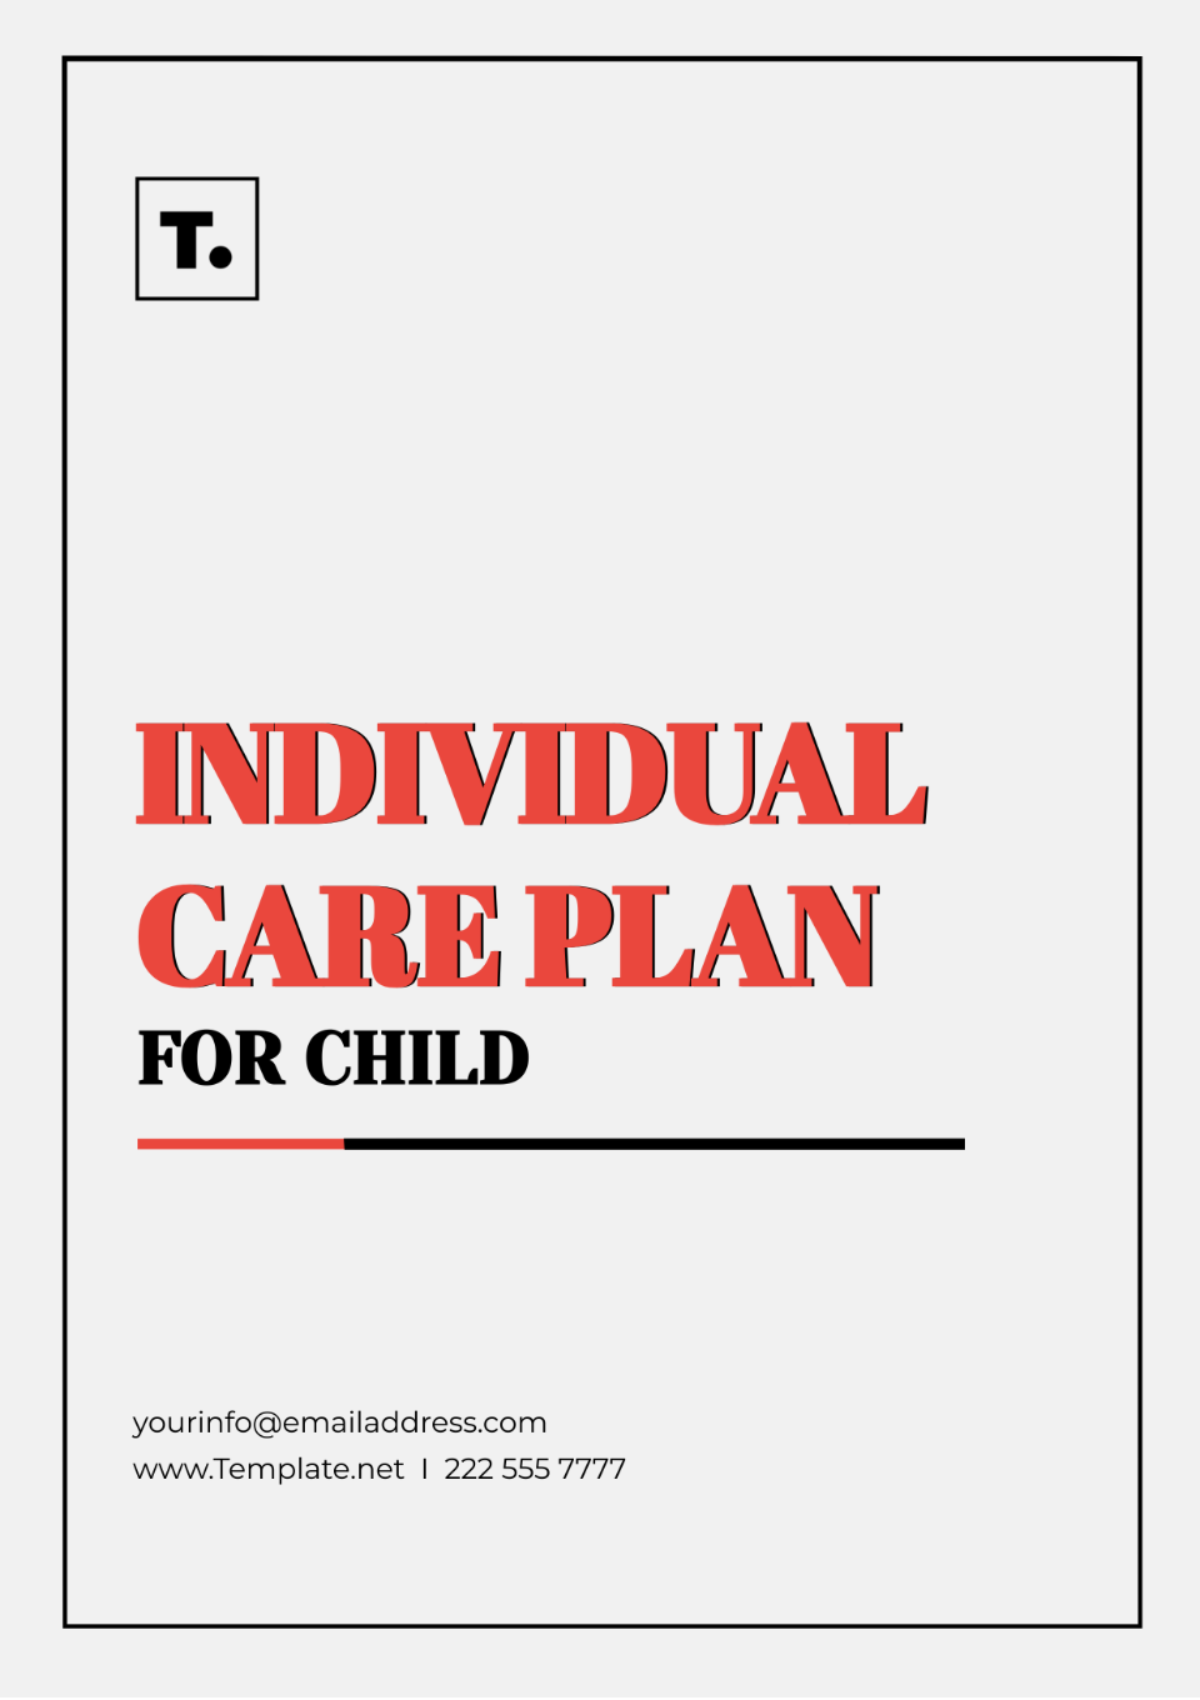 Individual Care Plan For Child Template